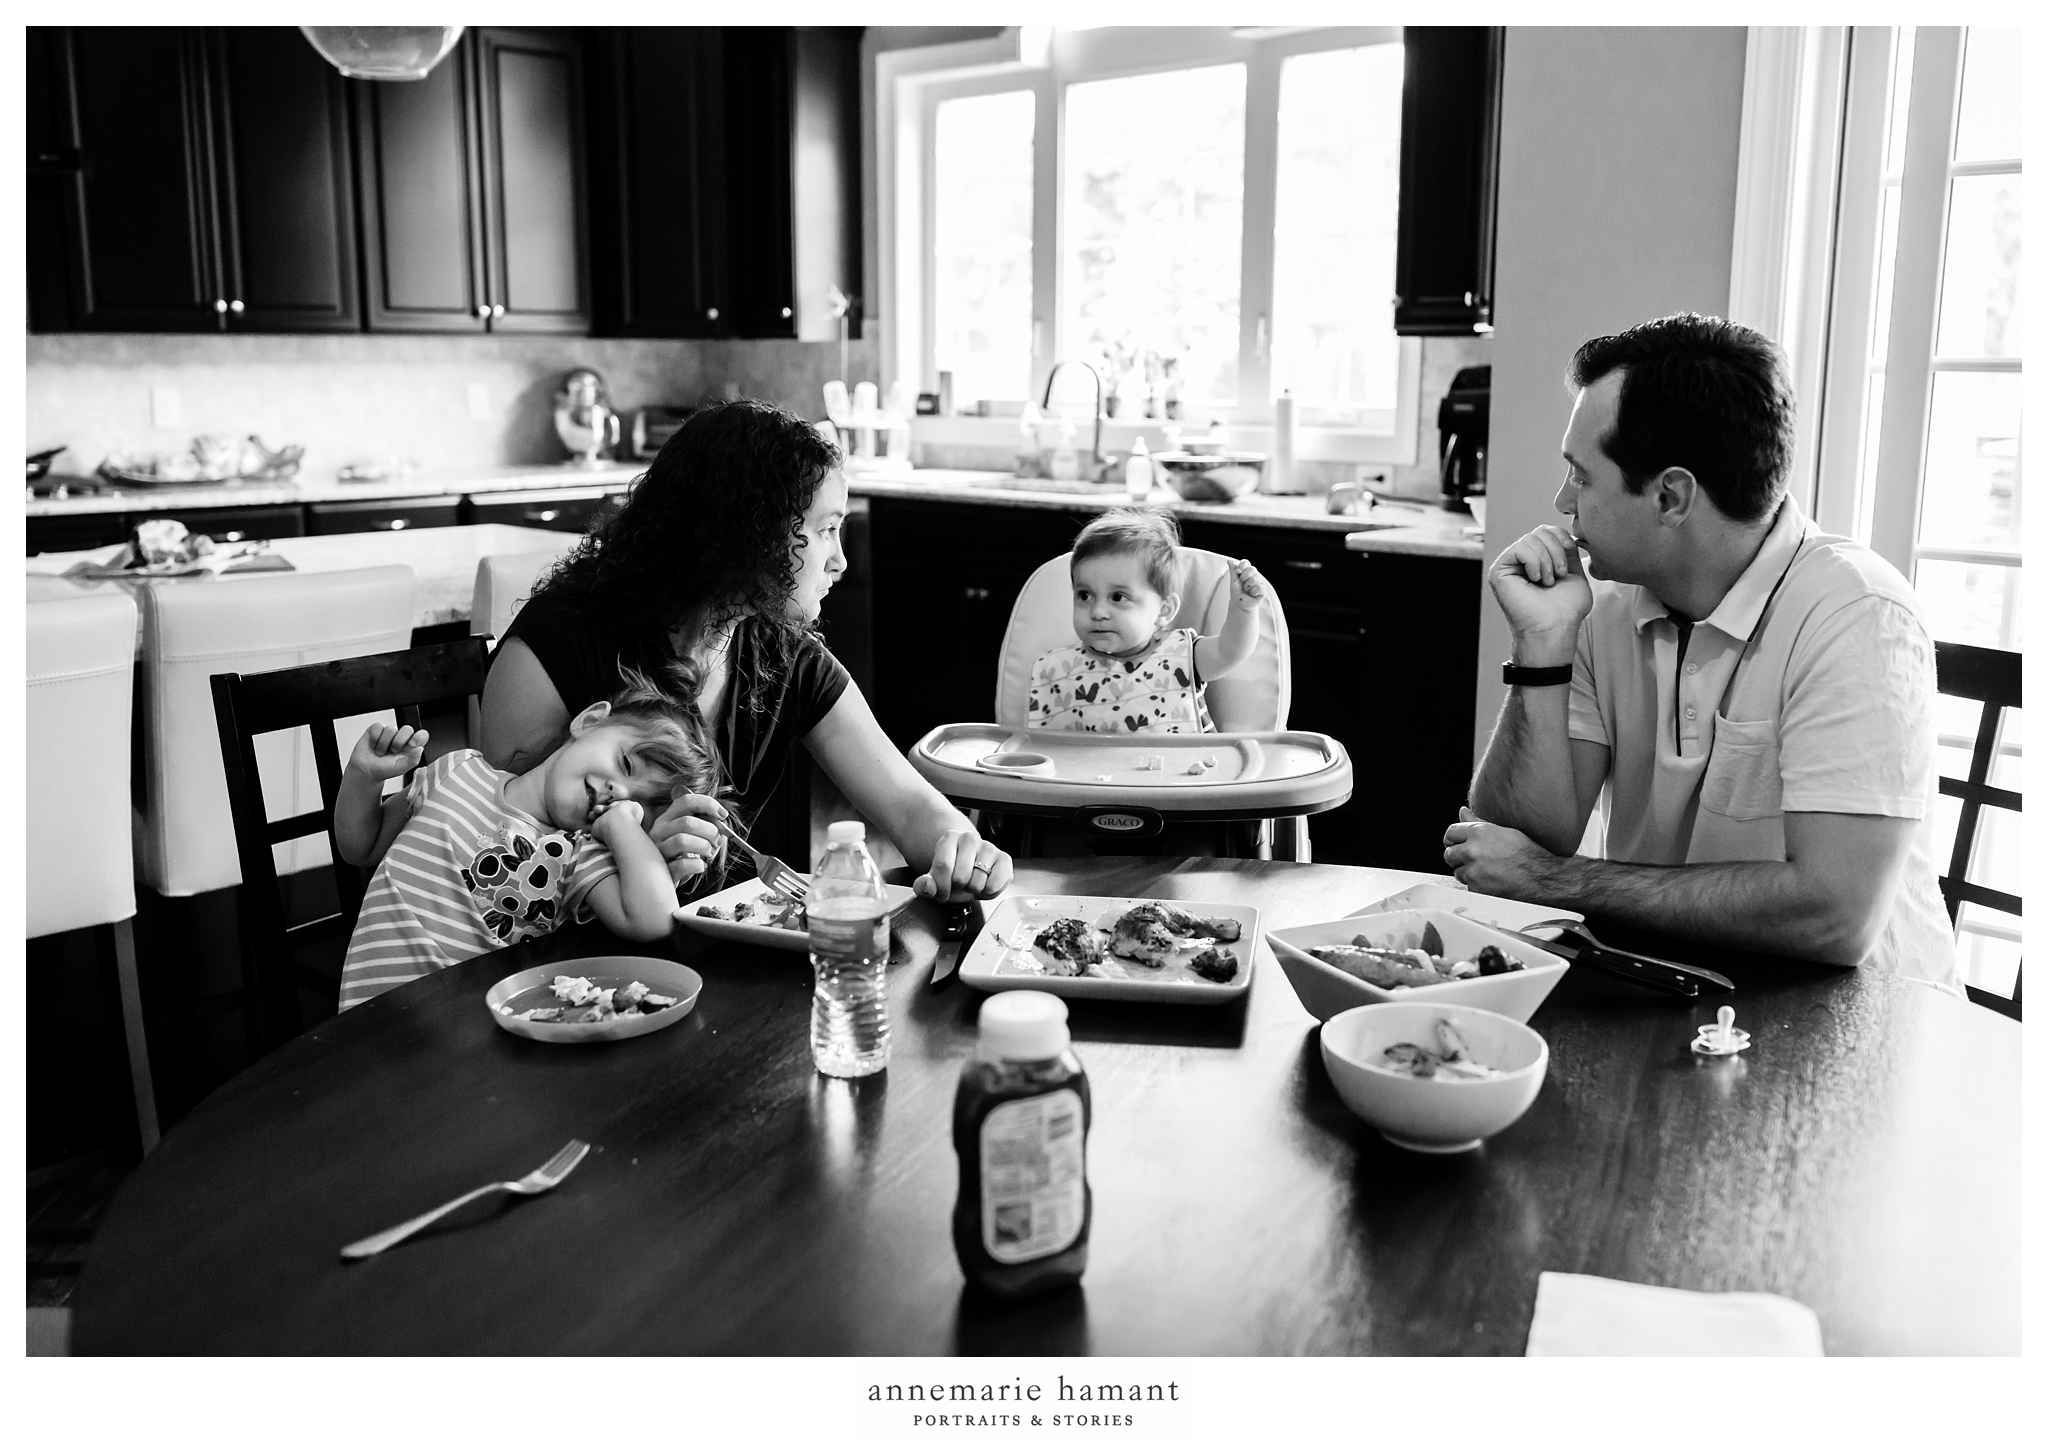 https://www.annemariehamant.com/blog/montgomery-county-pa-life-story-family-session-annemarie-hamant-portraits-stories-documentary-photographer